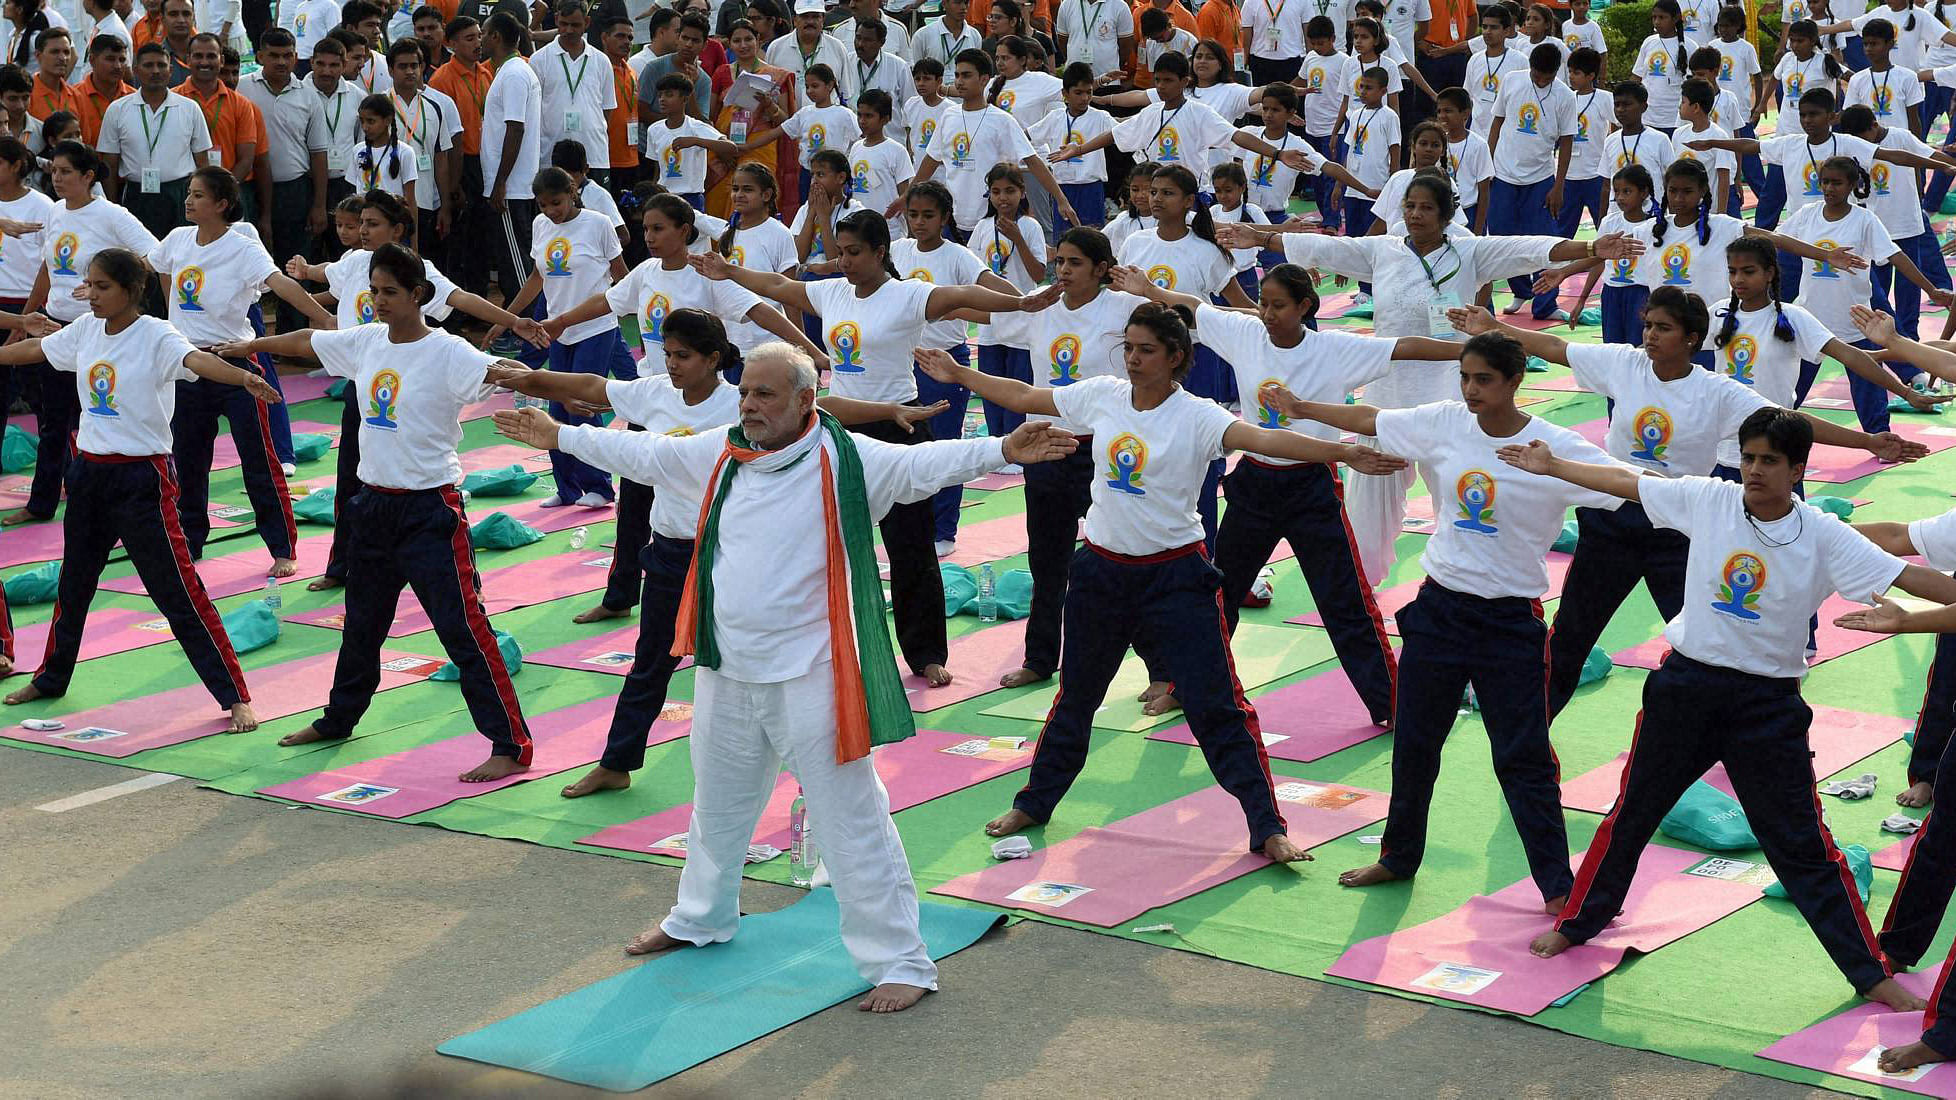 Prime Minister Narendra Modi performs yoga along with thousands of others at a mass yoga session to mark the International Day of Yoga 2015. (Photo: PTI)